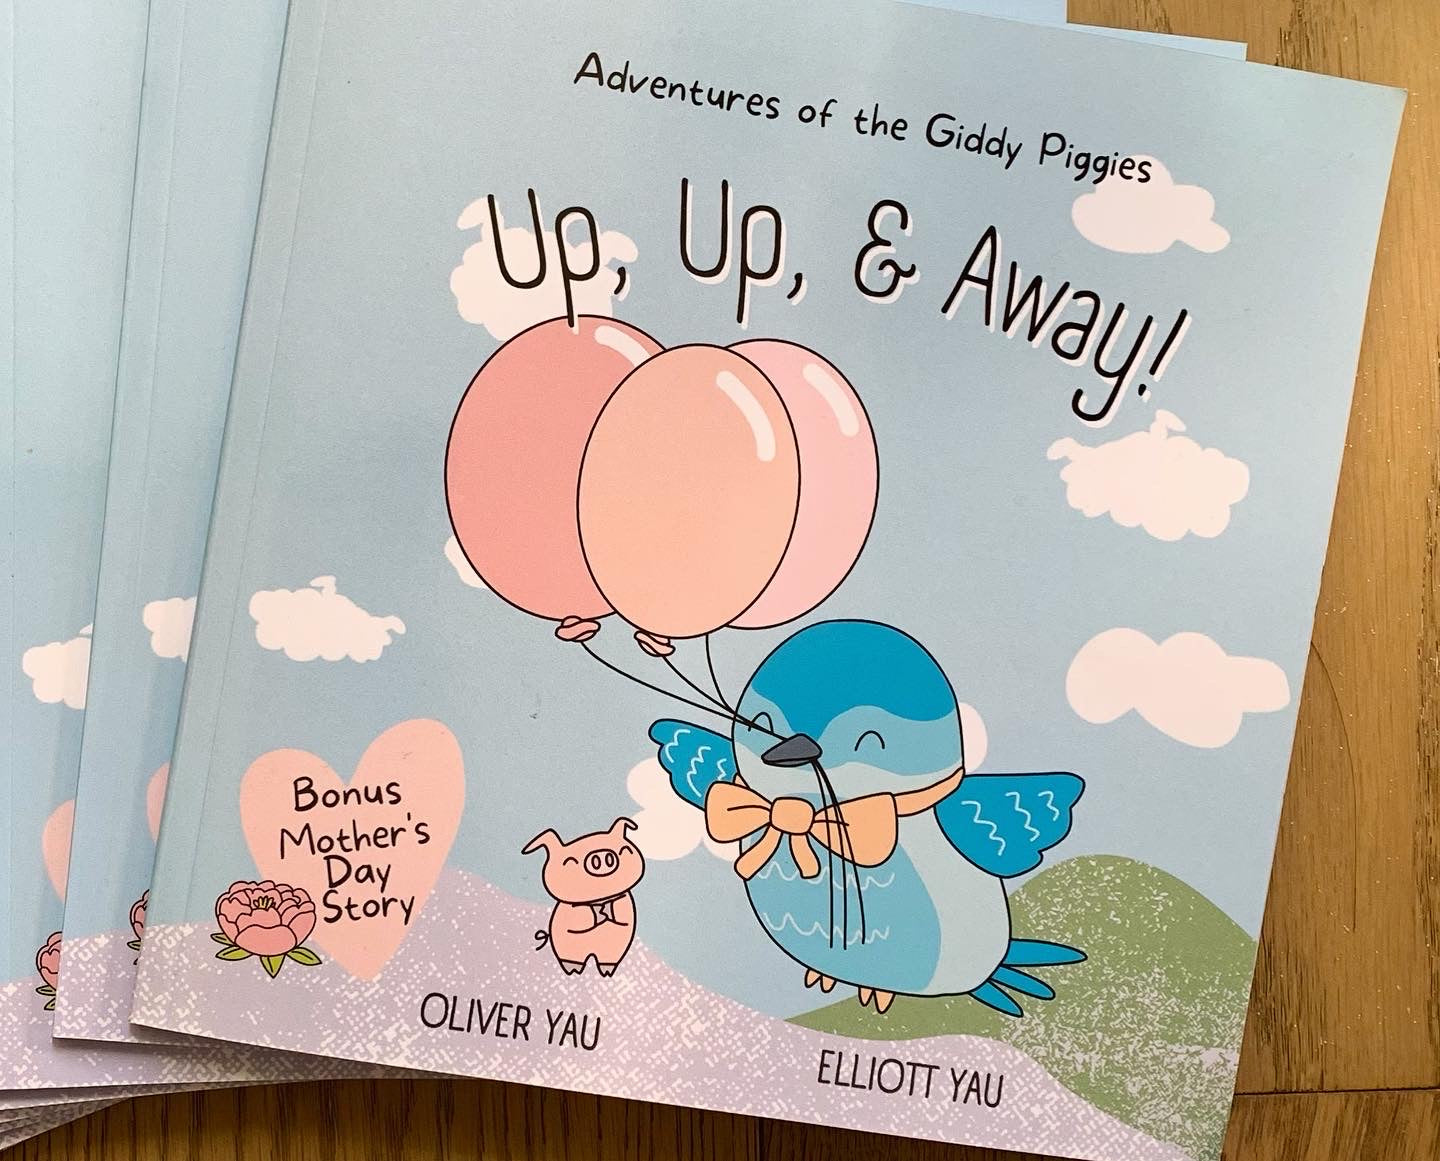 Up, Up, & Away (with Bonus Story 'Giddy Piggies Mother's Day'): A Giddy Piggies Adventure